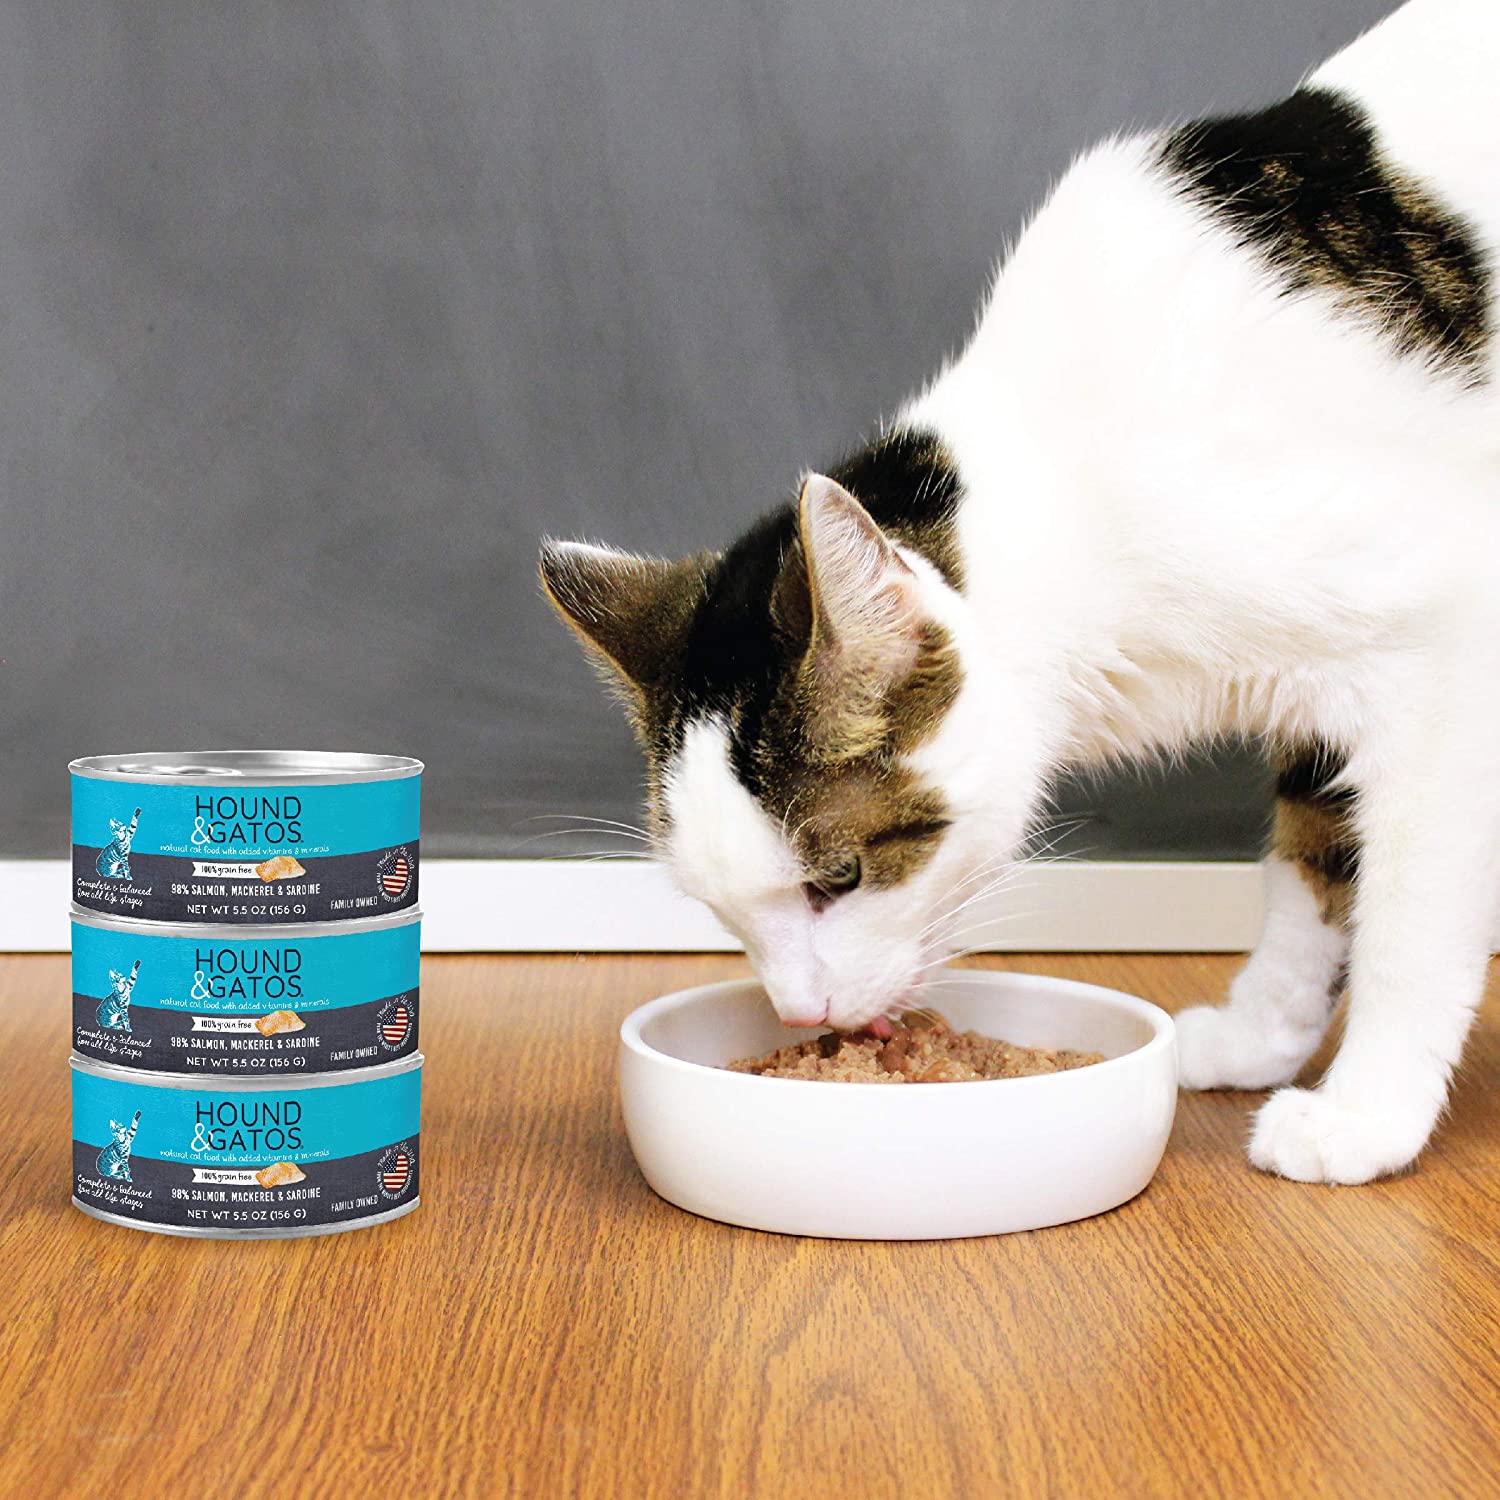 Hound & Gatos Natural Wet Cat Food, 98% Meat, Fish or Poultry Recipes, For All Life Stages, Made in the USA